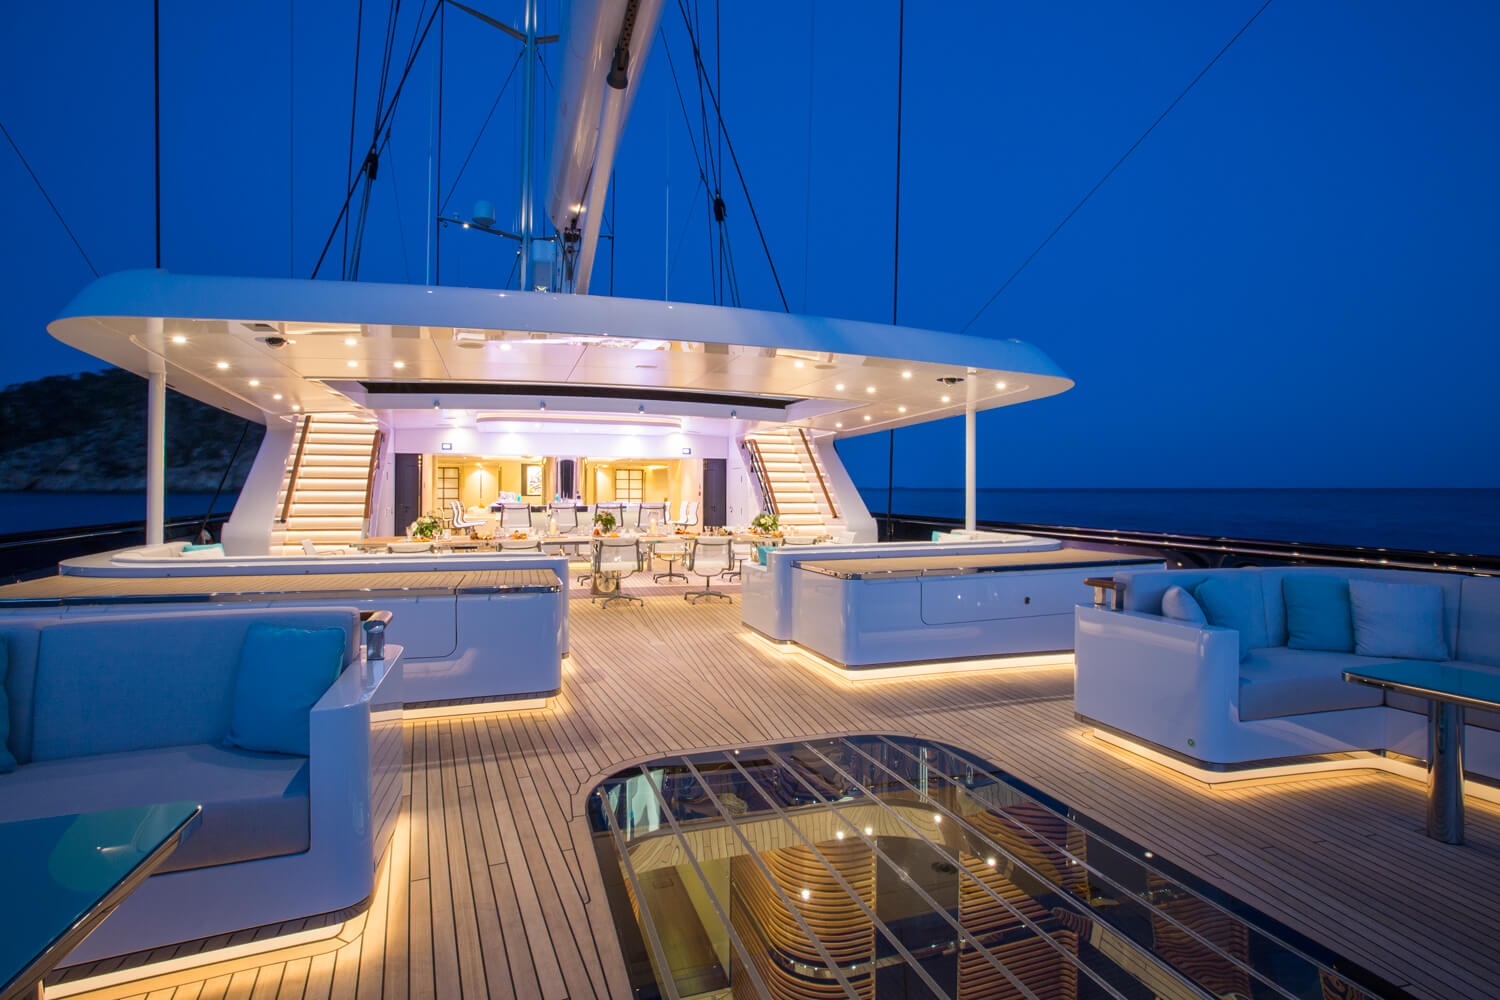 Aft Deck Relaxation And Socialising Area By Night